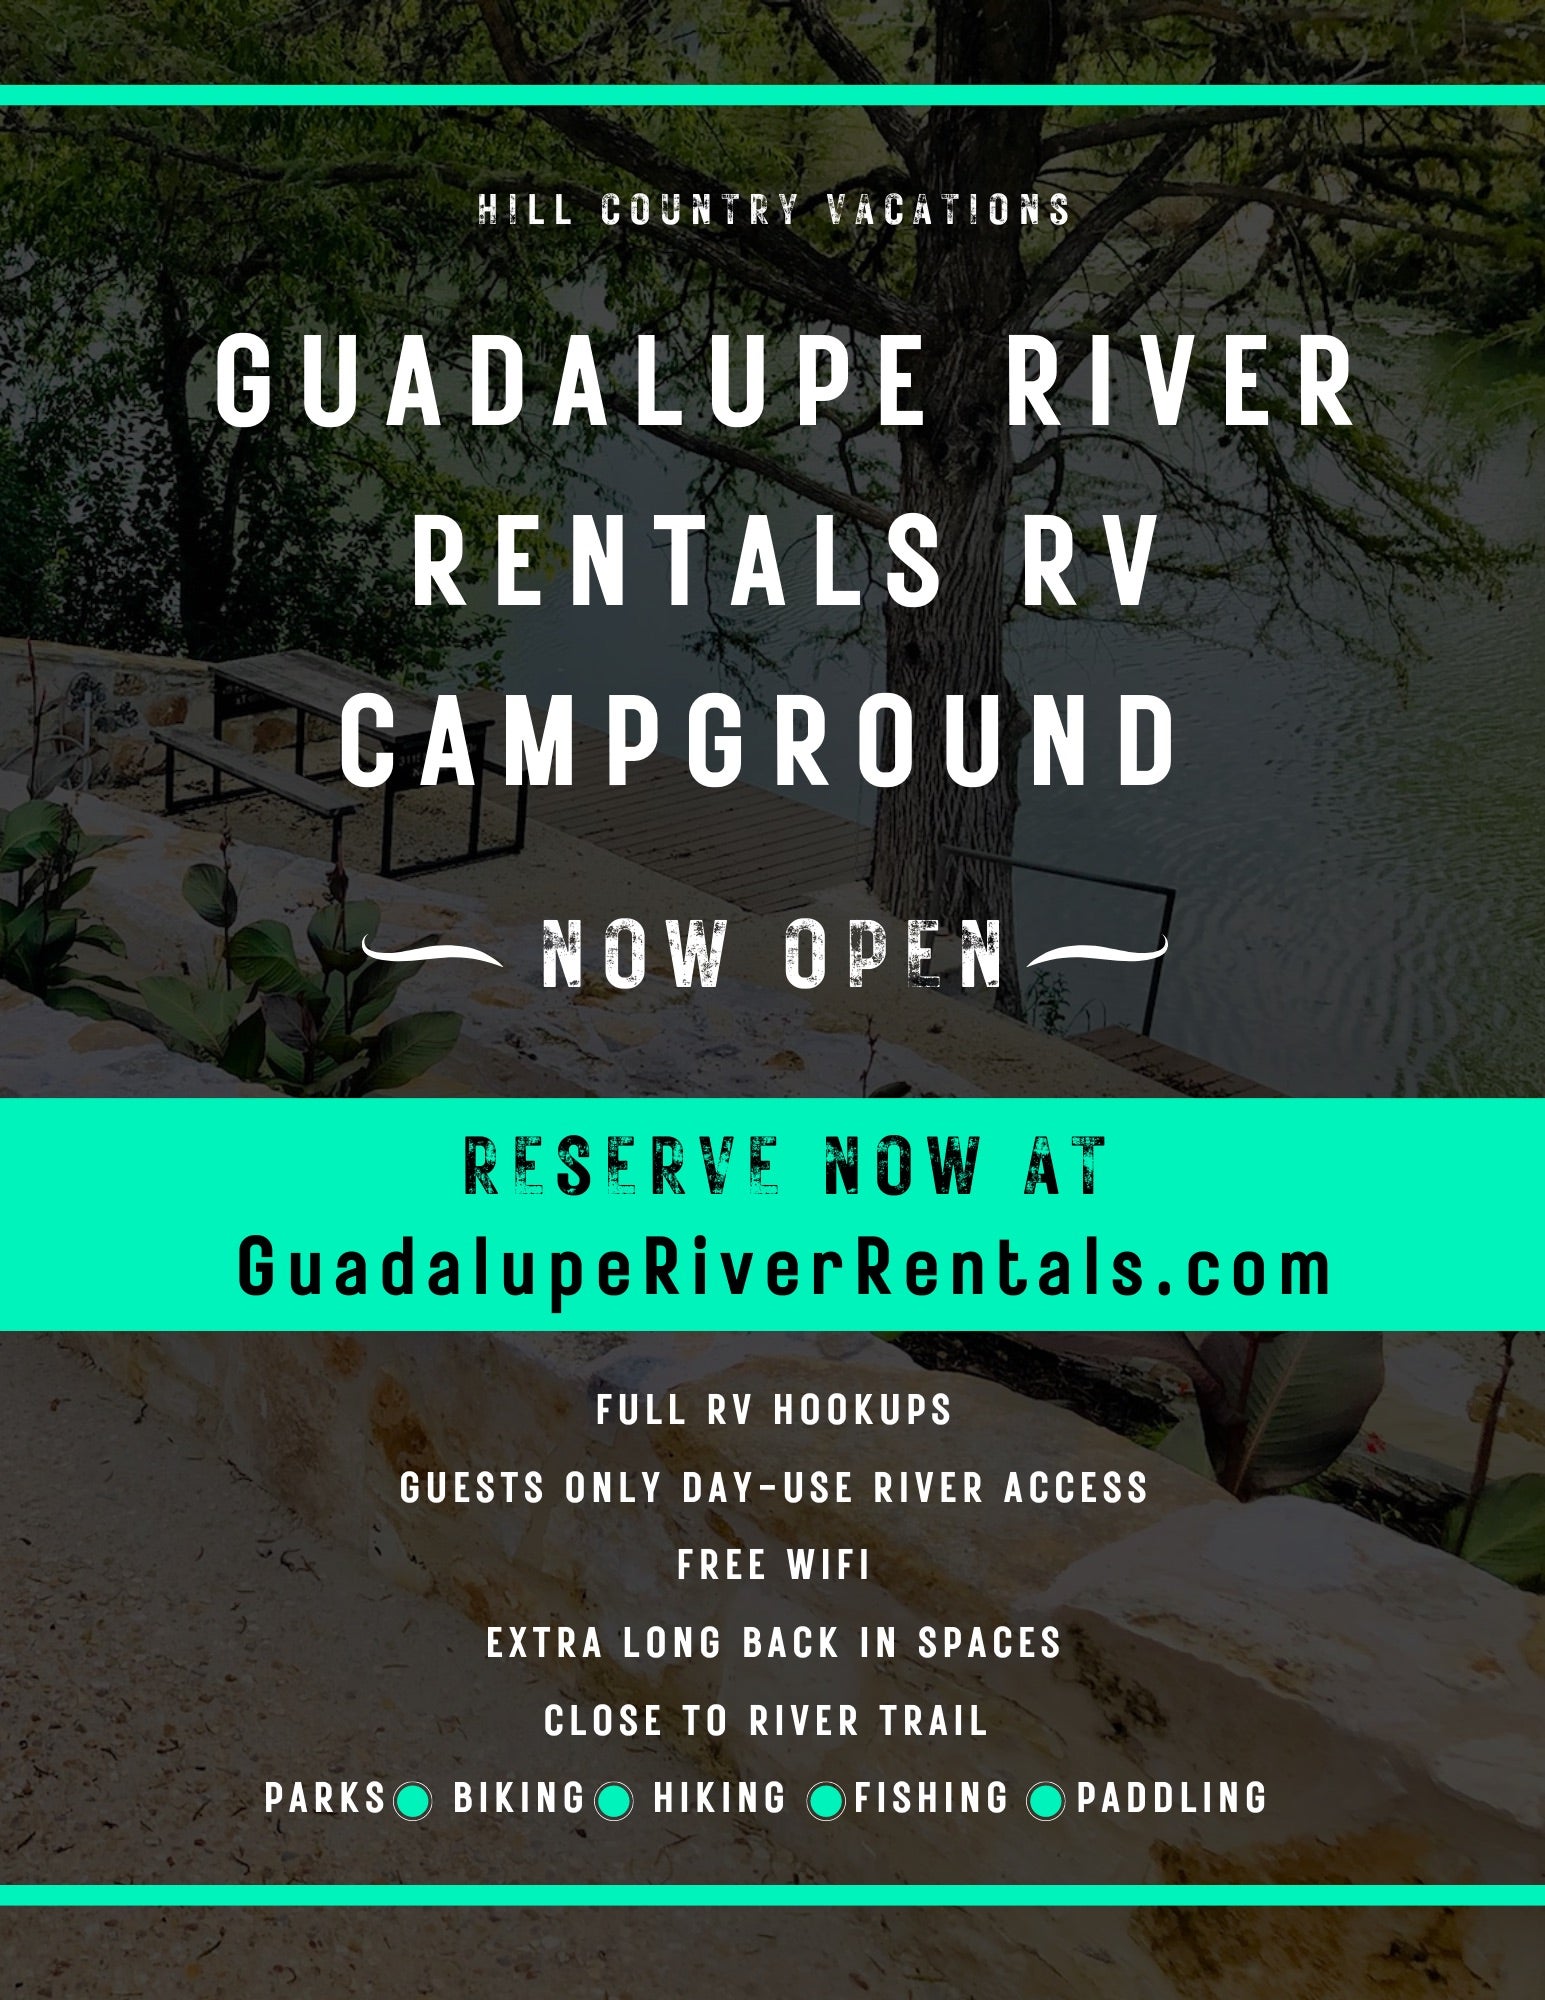 Camper submitted image from Guadalupe River Rentals RV Campground - 2